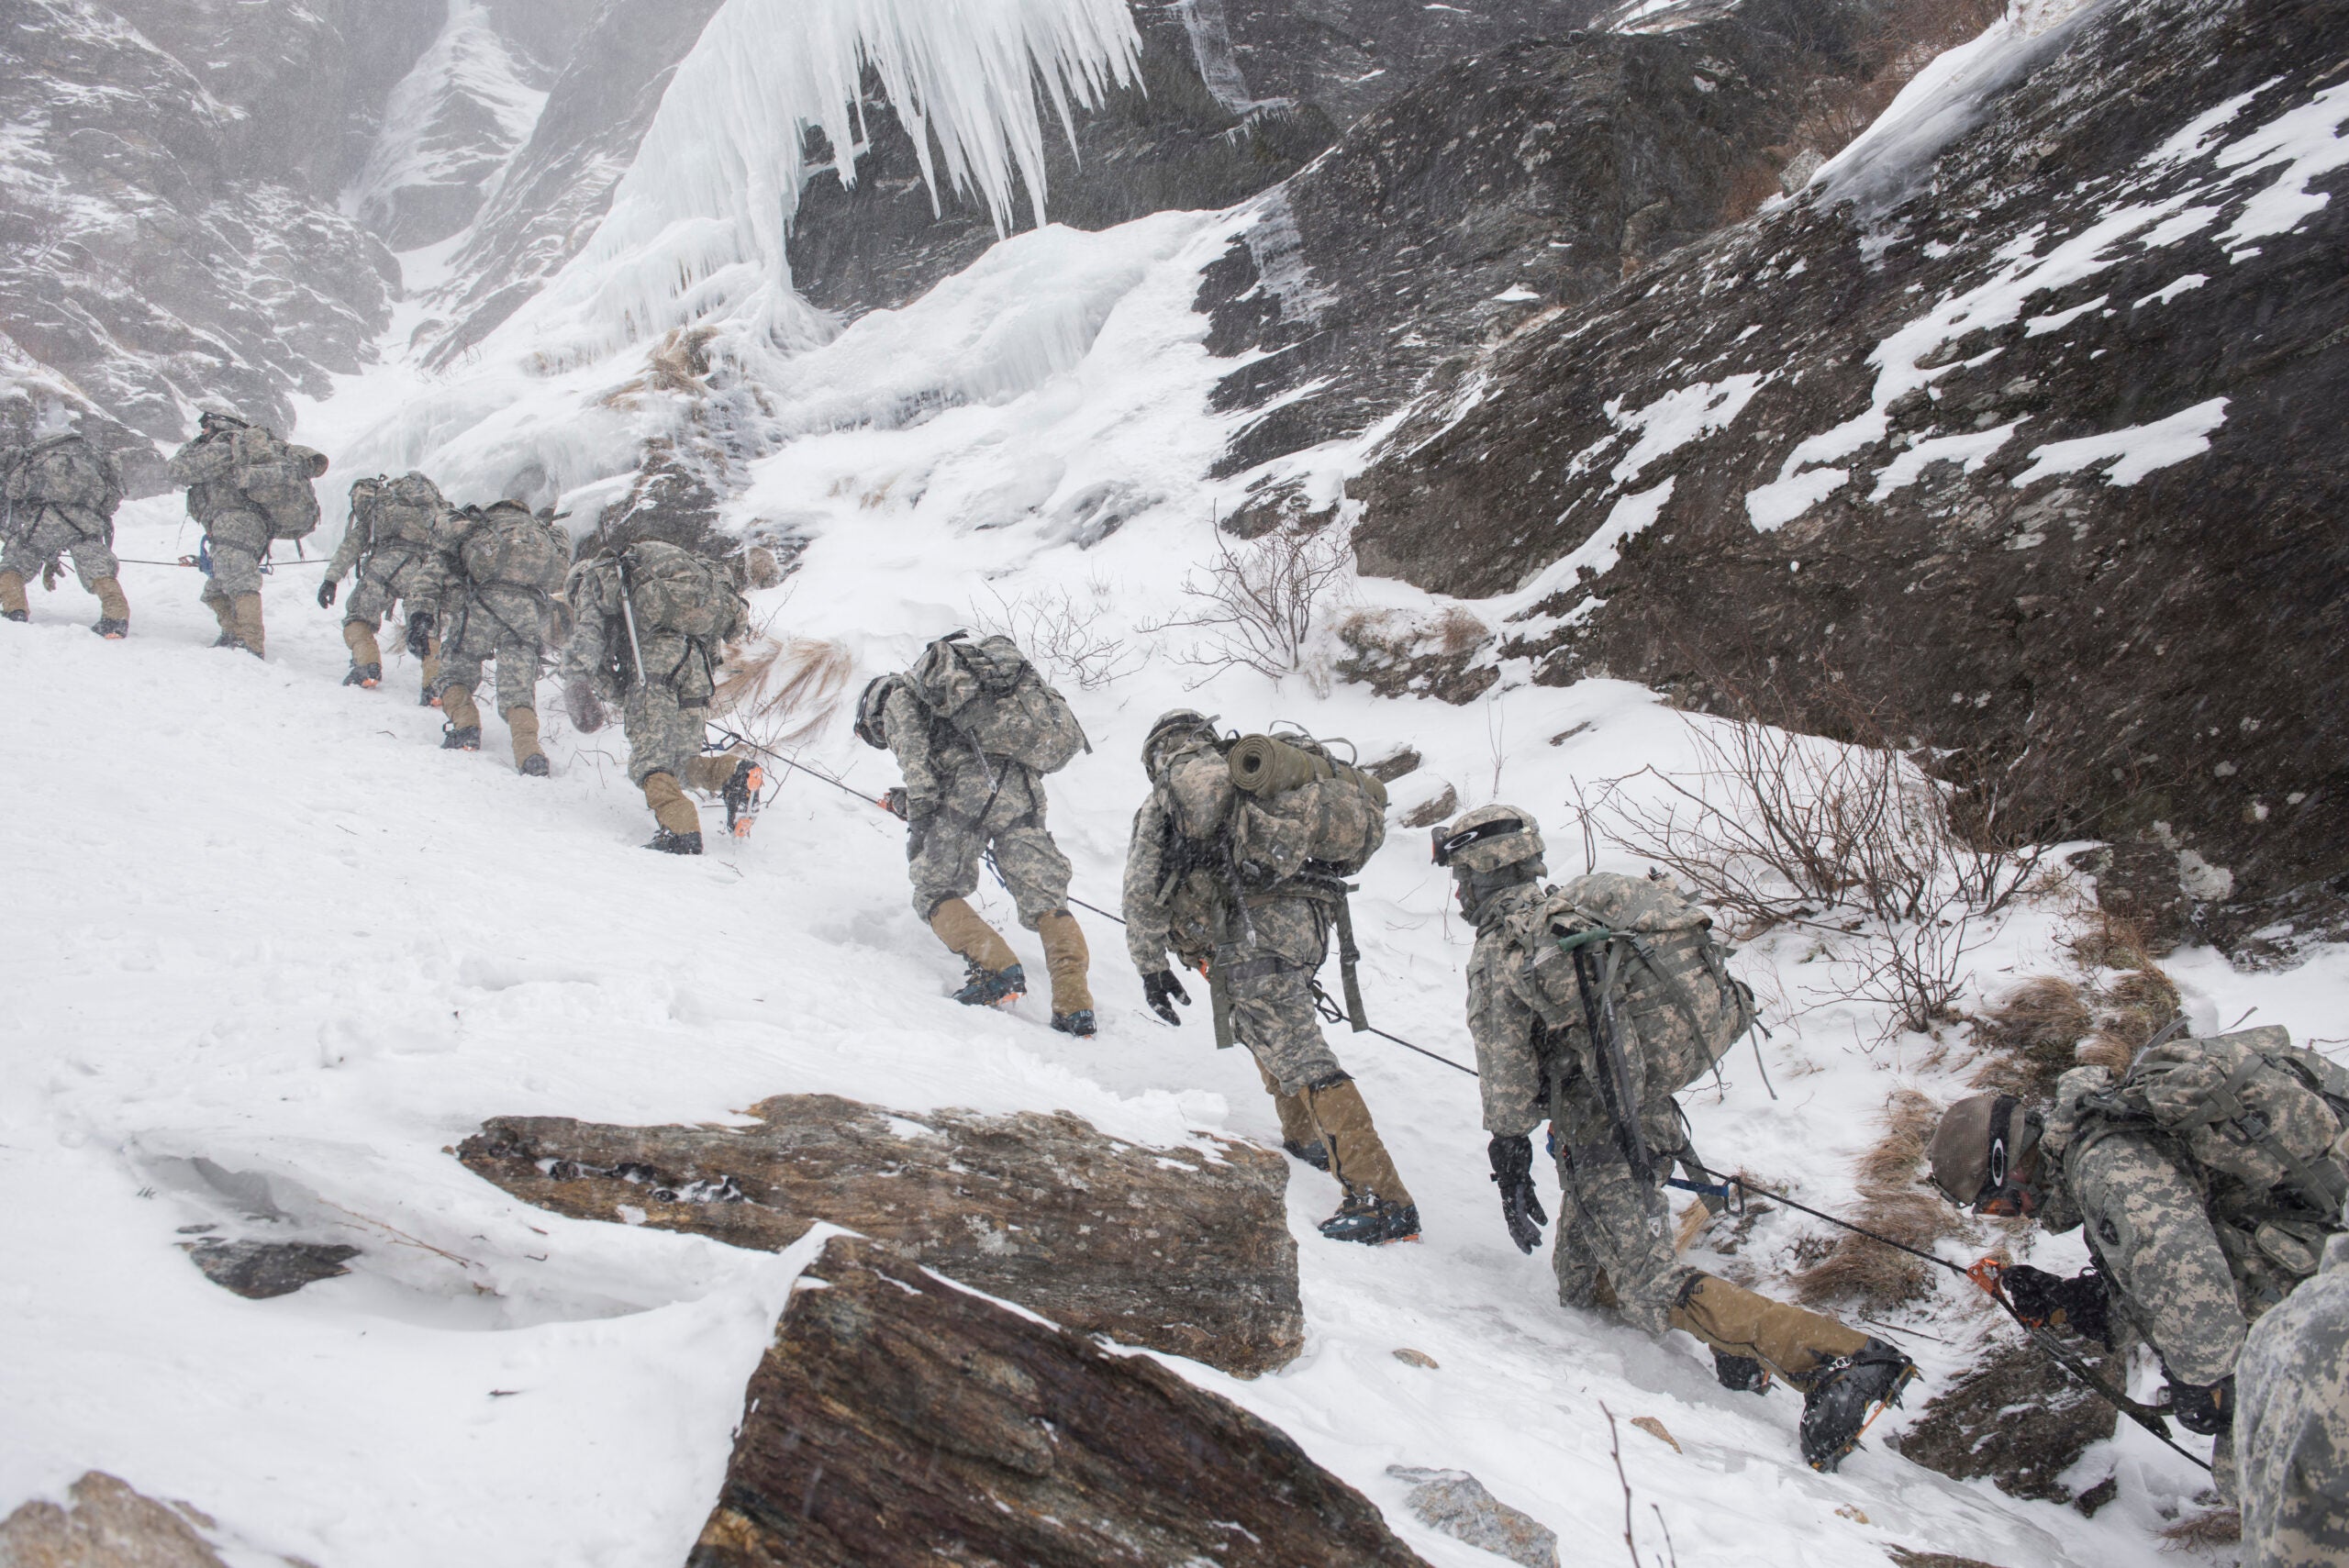 Soldiers attending the U.S. Army Mountain Warfare School in Jericho, Vt., climb Smugglers' Notch as part of their final phase of the Basic Military Mountaineering Course, in Jeffersonville, Vt., Feb. 19, 2015. Students in the Basic Military Mountaineering course spend two weeks acquiring the skills and knowledge required to operate in mountainous terrain. (U.S. Air National Guard photo by Tech. Sgt. Sarah Mattison)